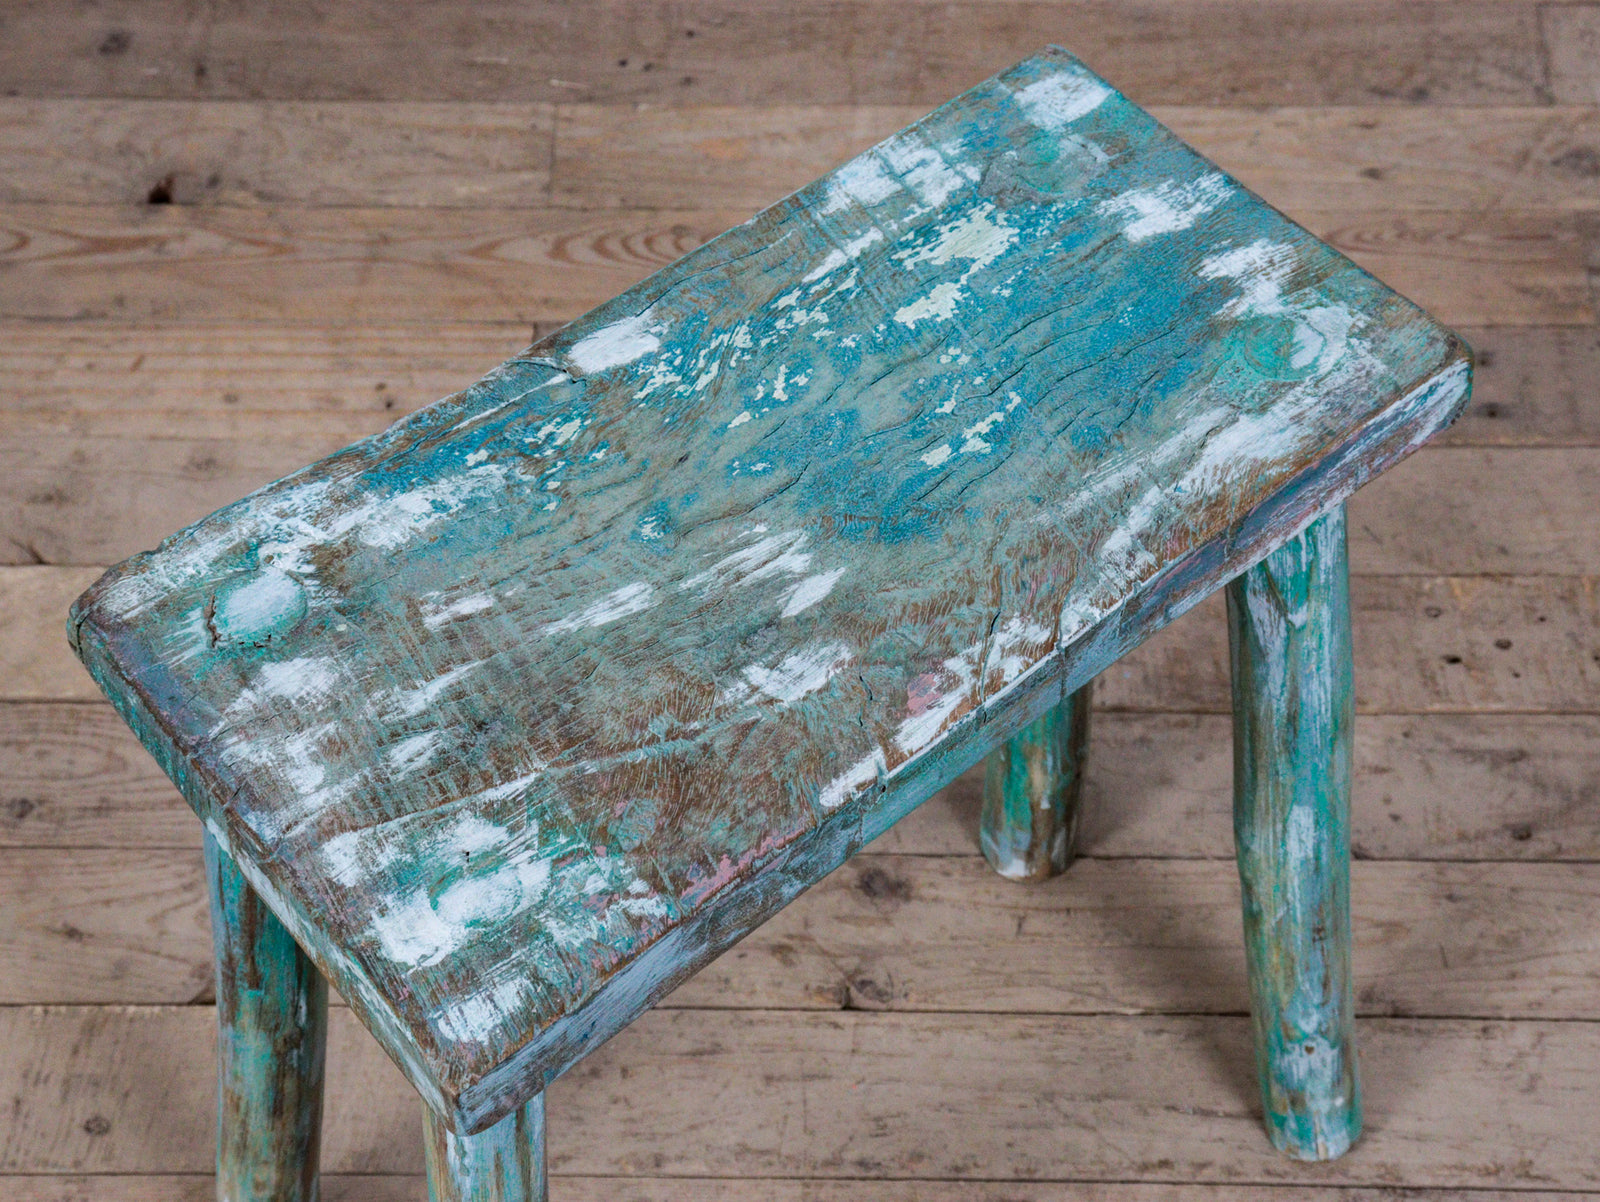 MILL-1791/1 Painted Stool C23